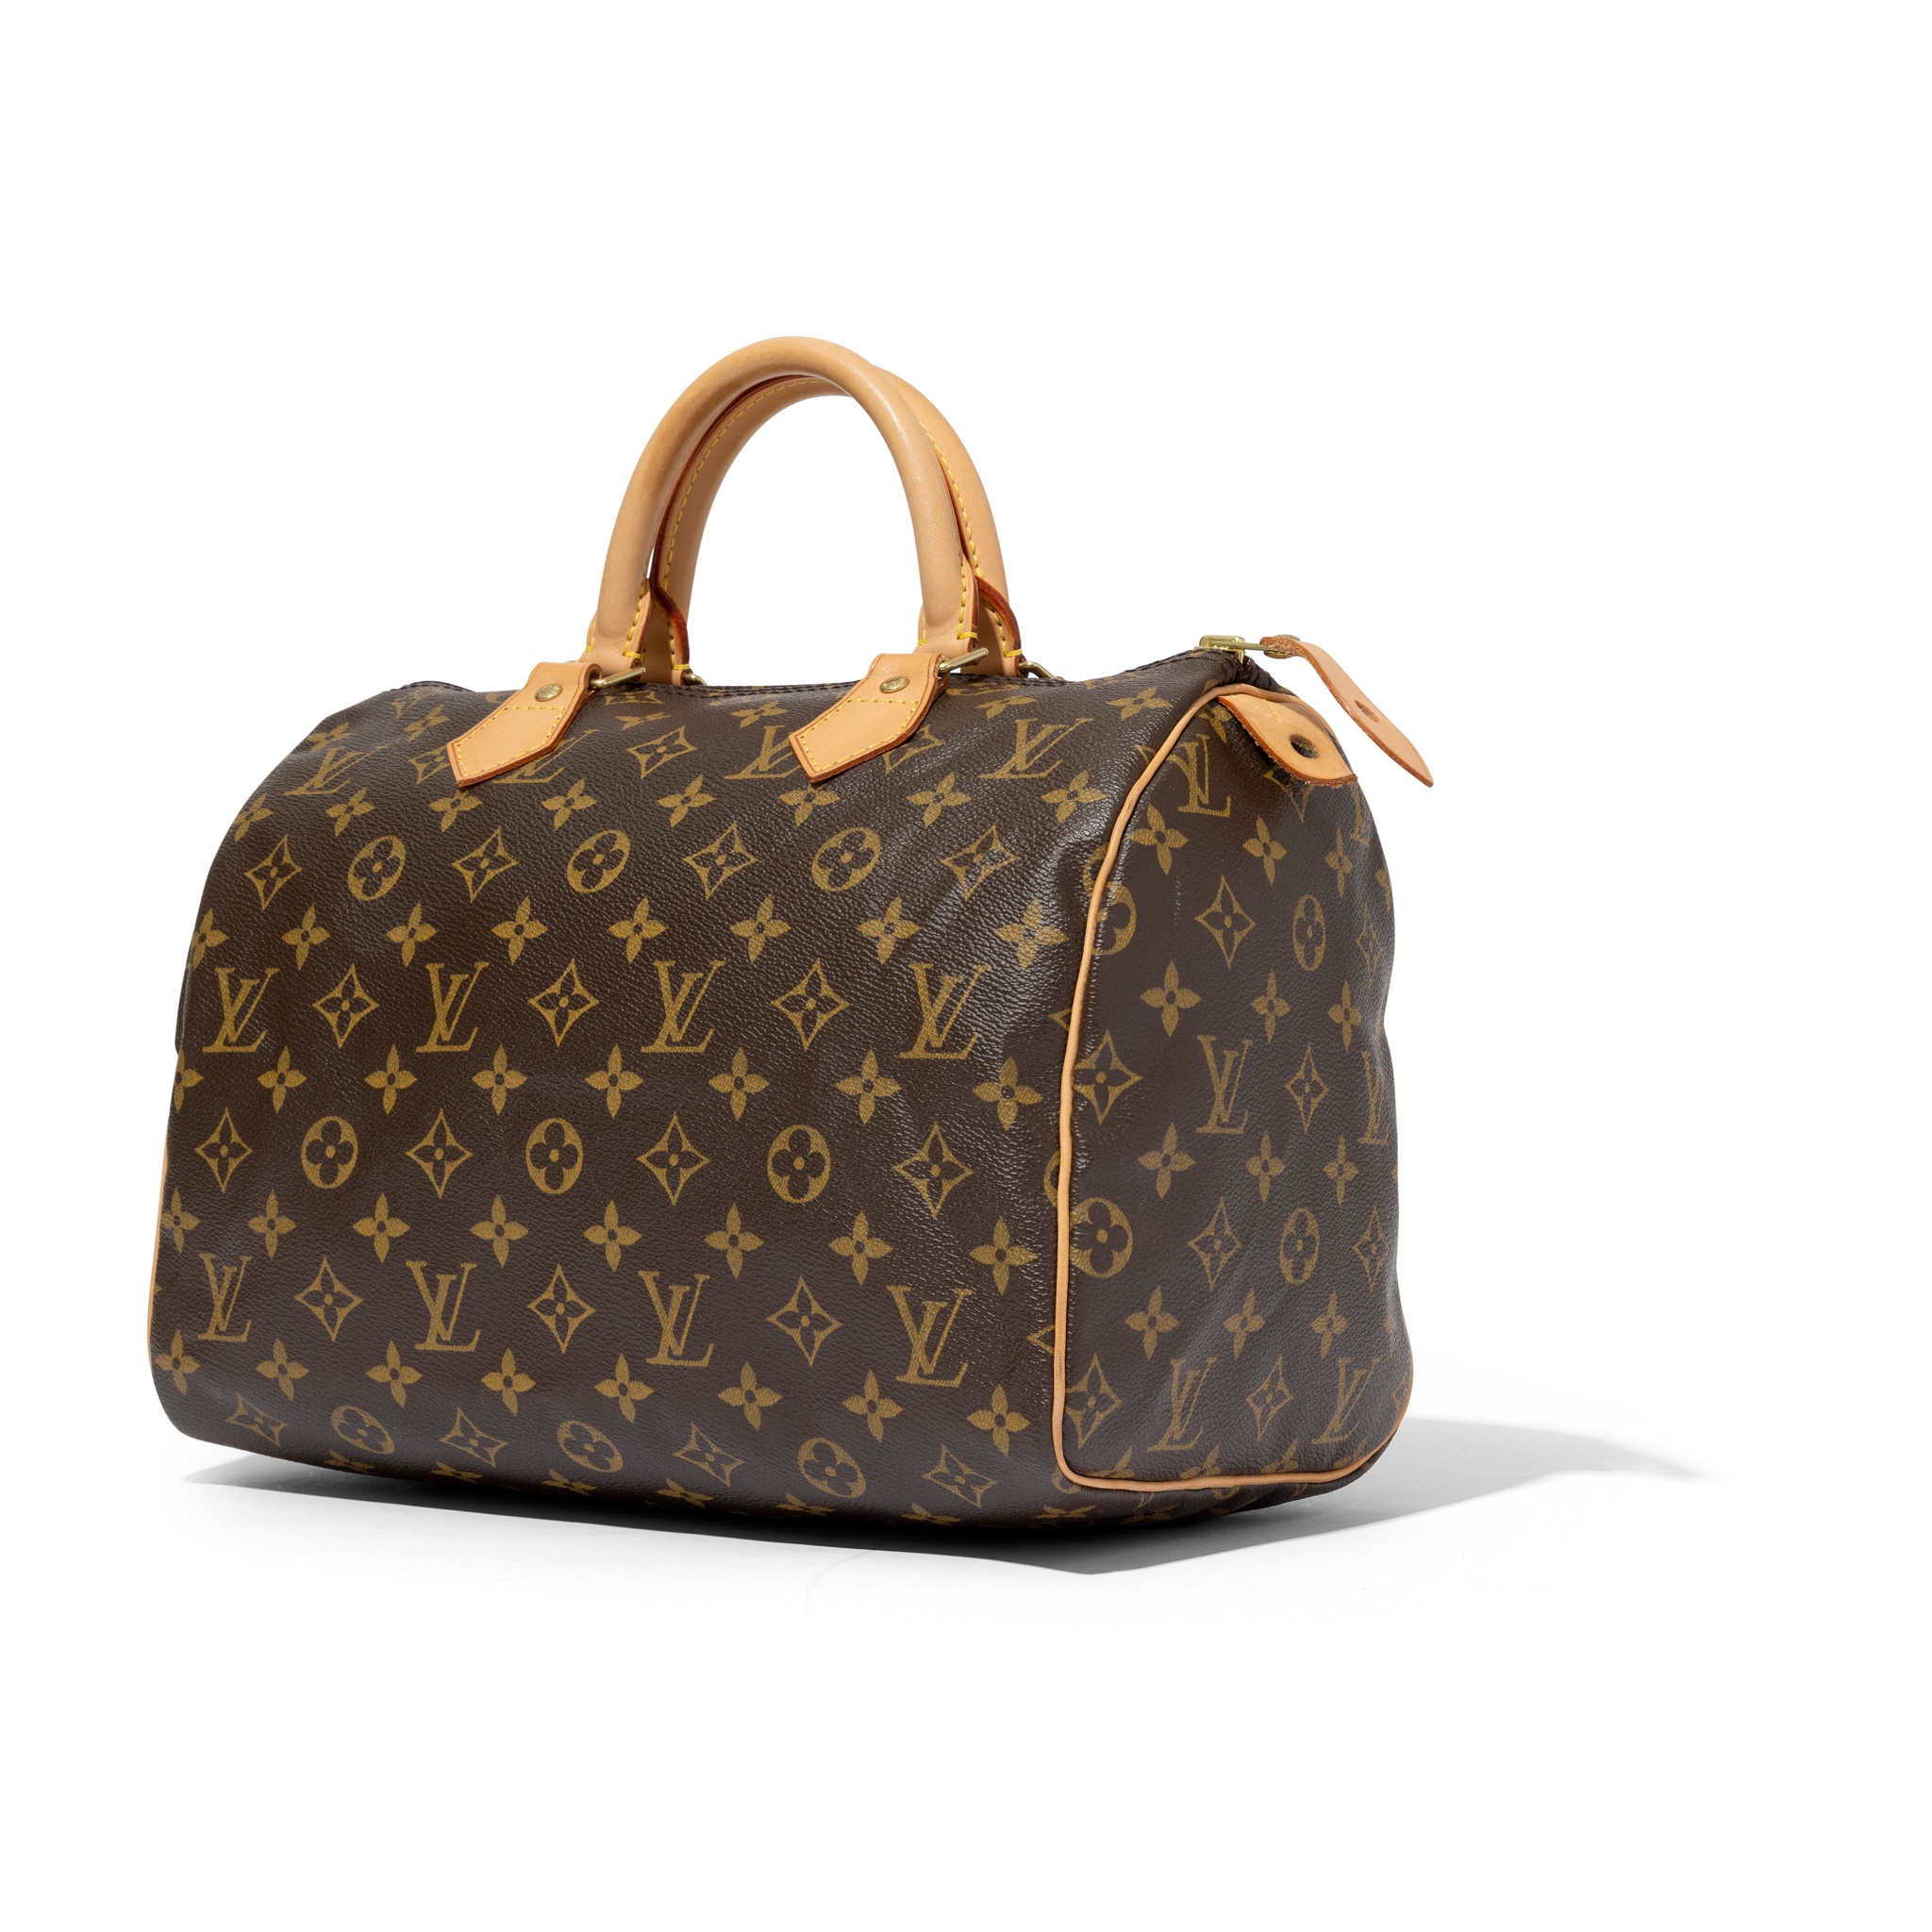 Highly Anticipated London Auction To Include 5 Rare Louis Vuitton 'Art'  Handbags